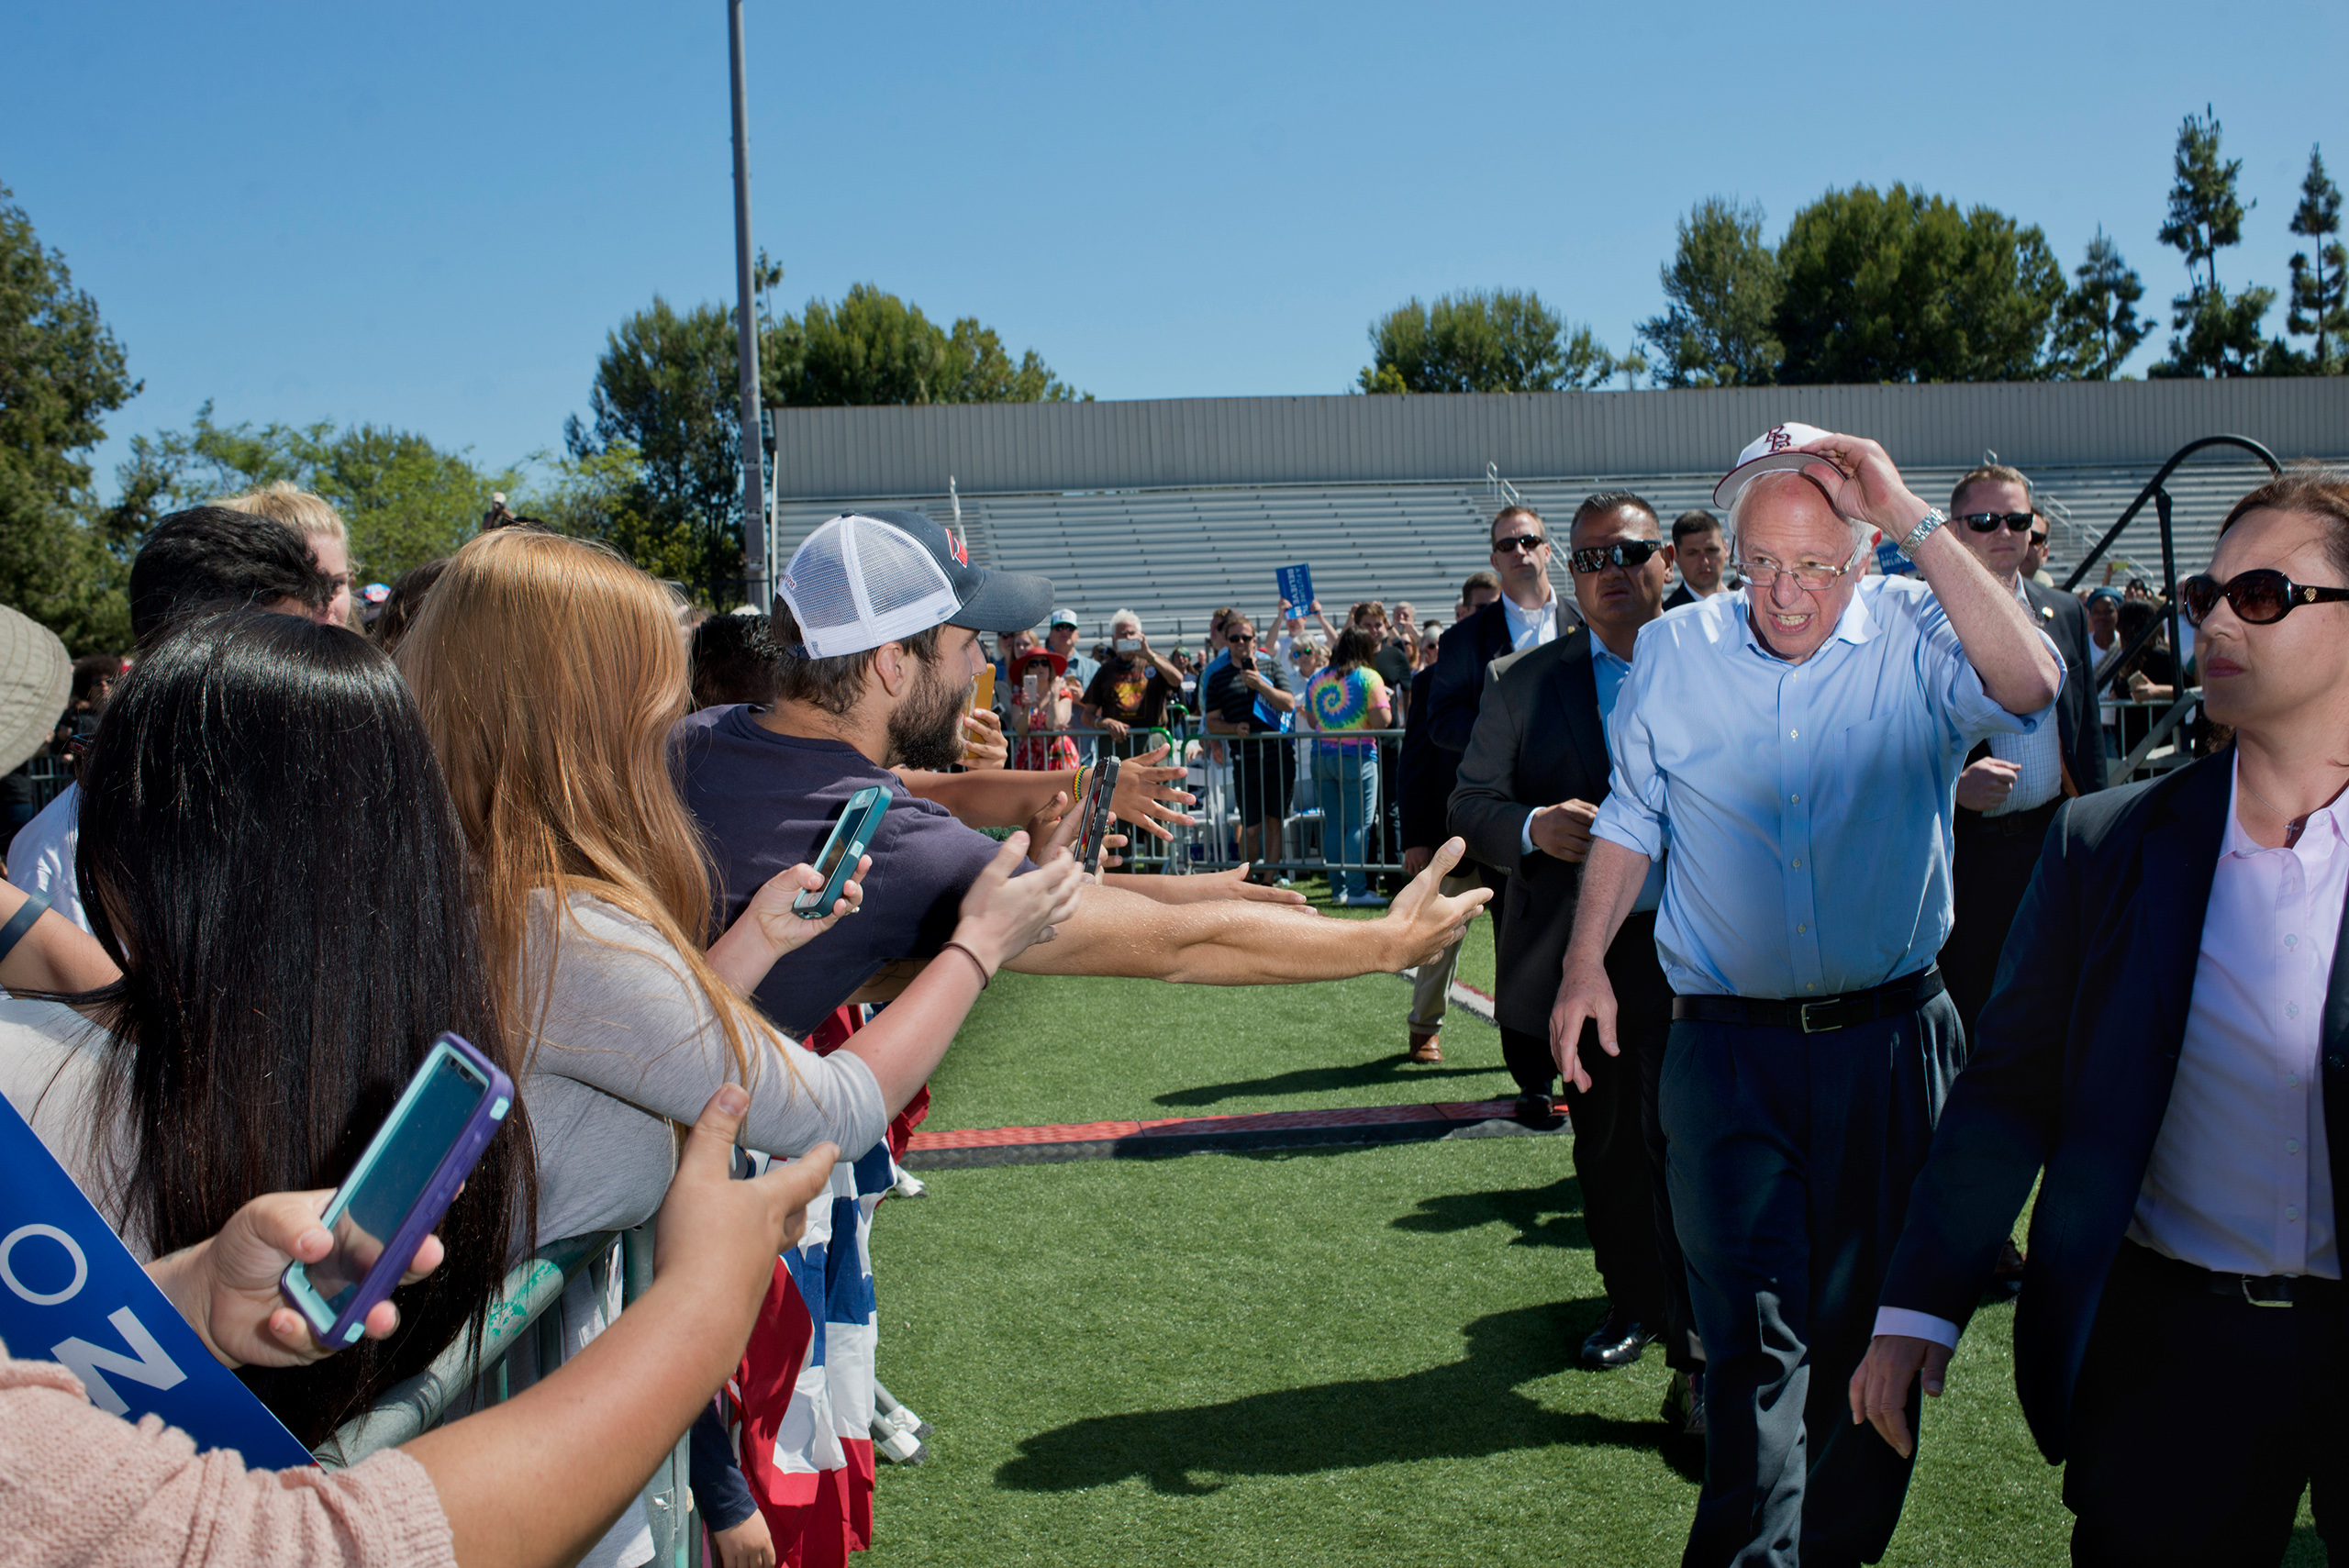 Bernie Sanders greets supporters at a campaign rally at Rancho Buena Vista High School in Vista, Calif., May 22, 2016.From  Bernie Sanders’ Californian Dreams